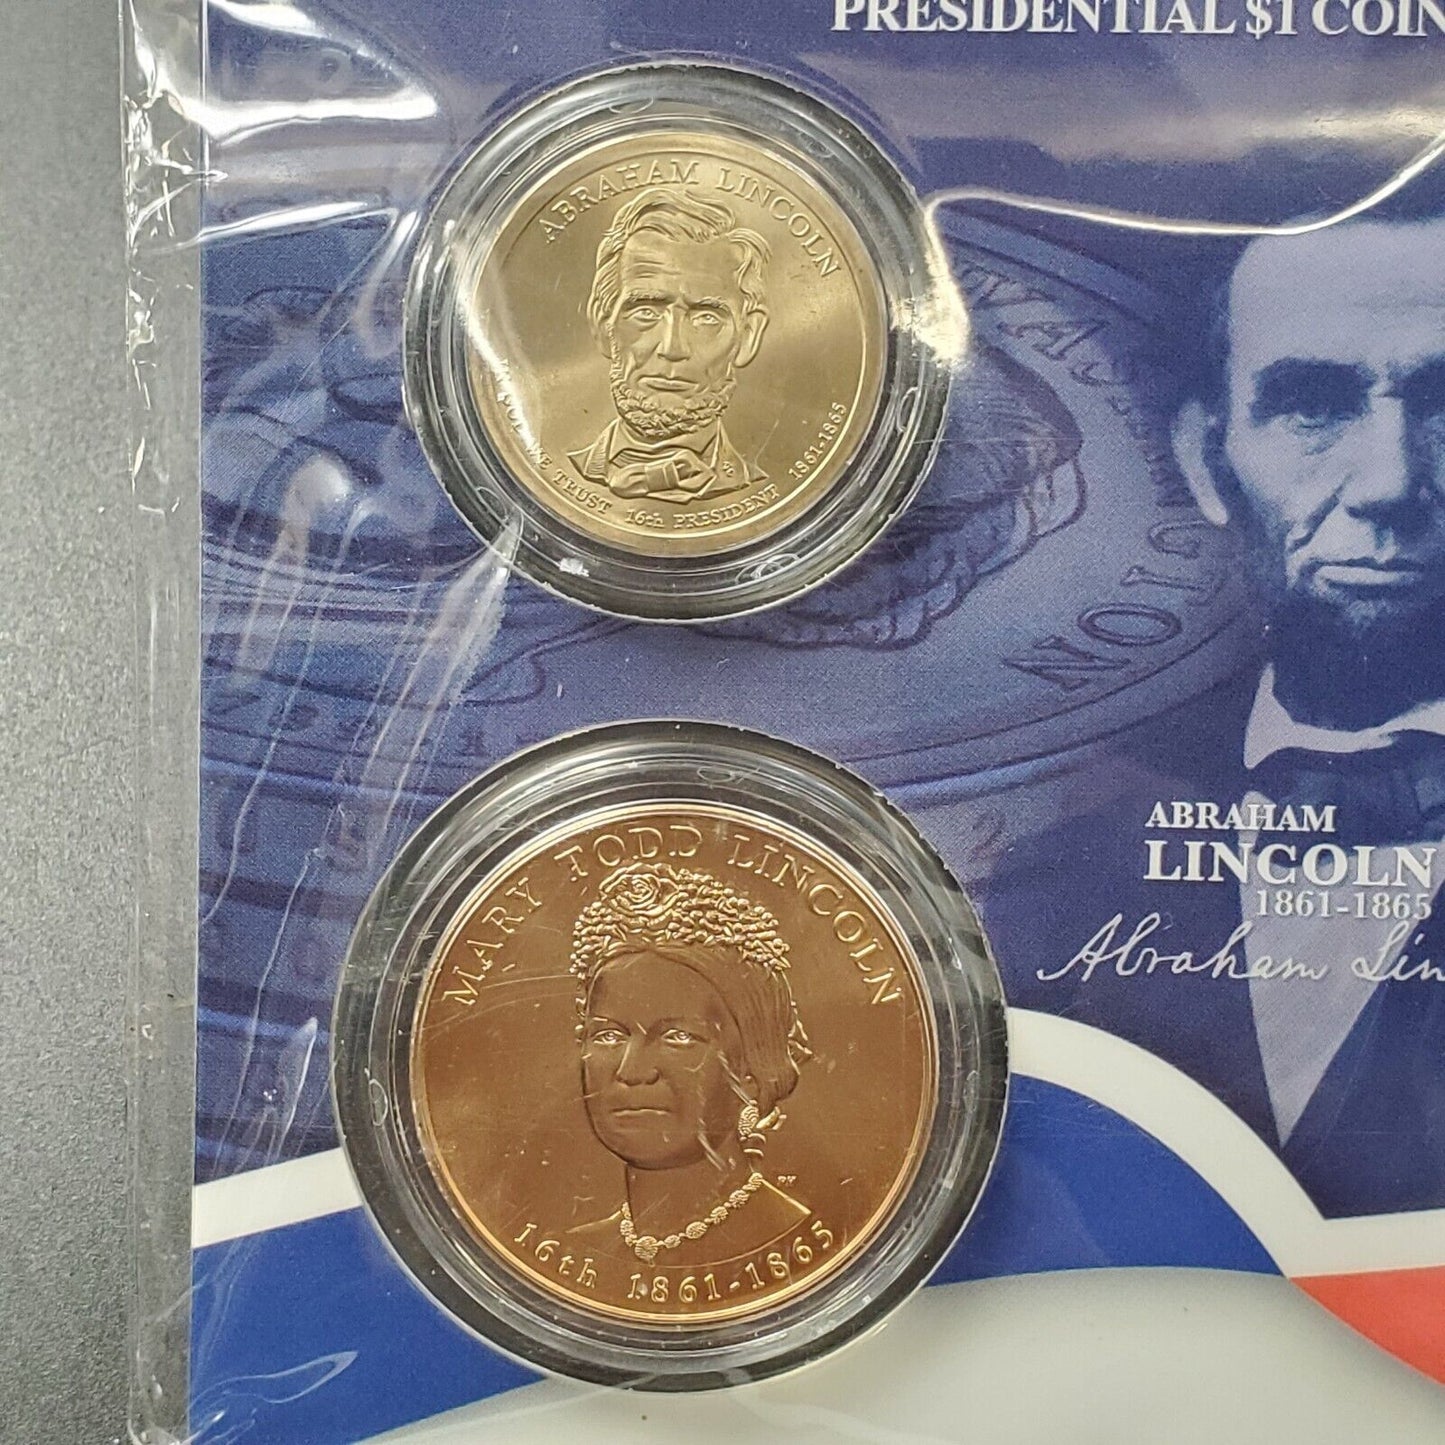 2010 Abraham Lincoln $1 Presidential Coin First Spouse Medal Sealed OGP